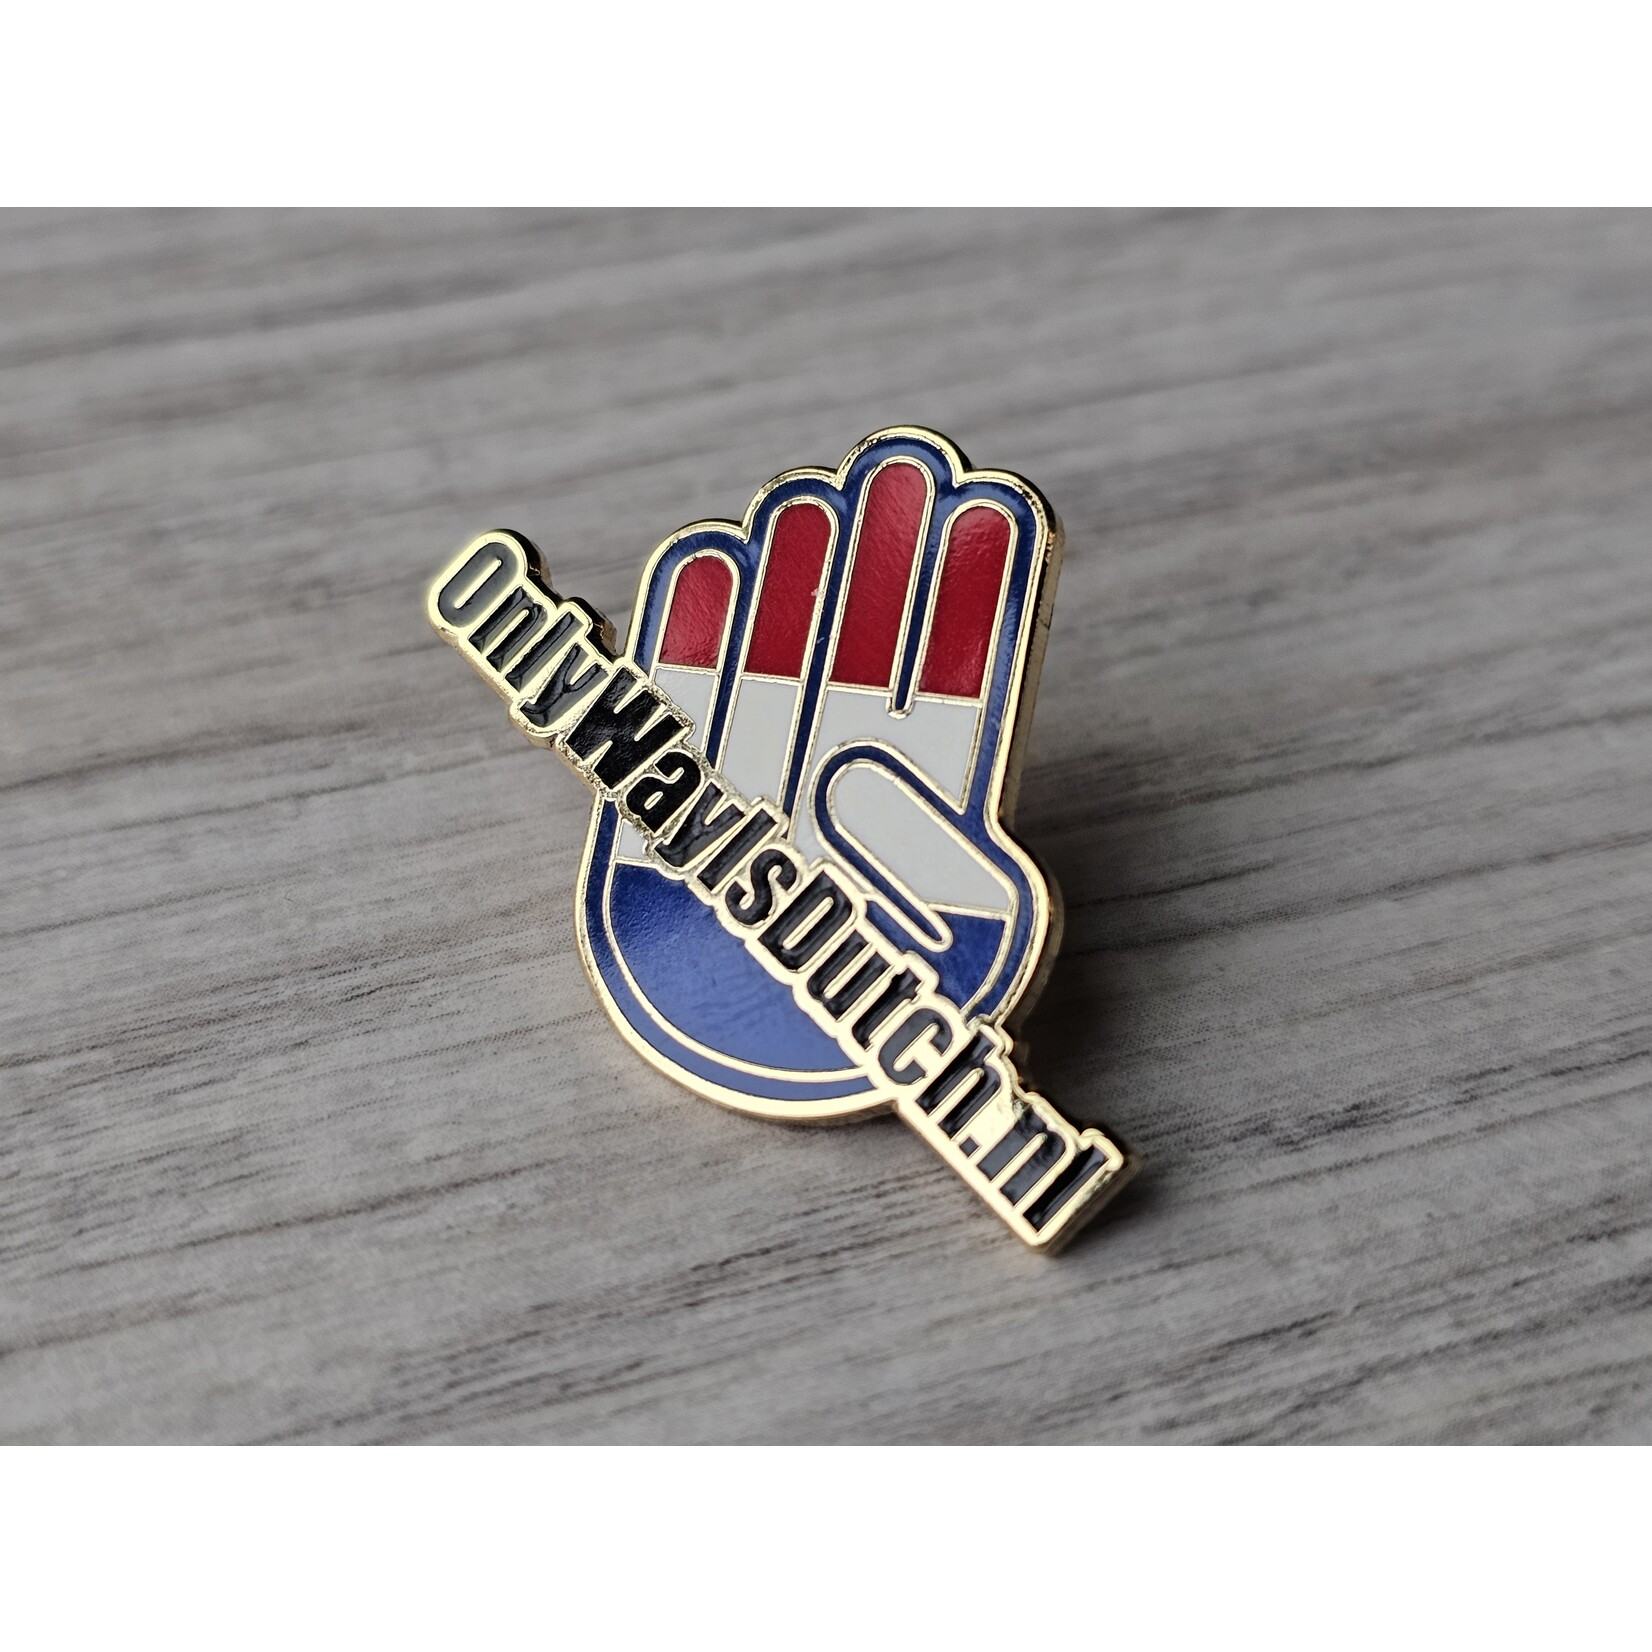 ONLY WAY IS DUTCH Only Way Is Dutch Pin - Hand Logo